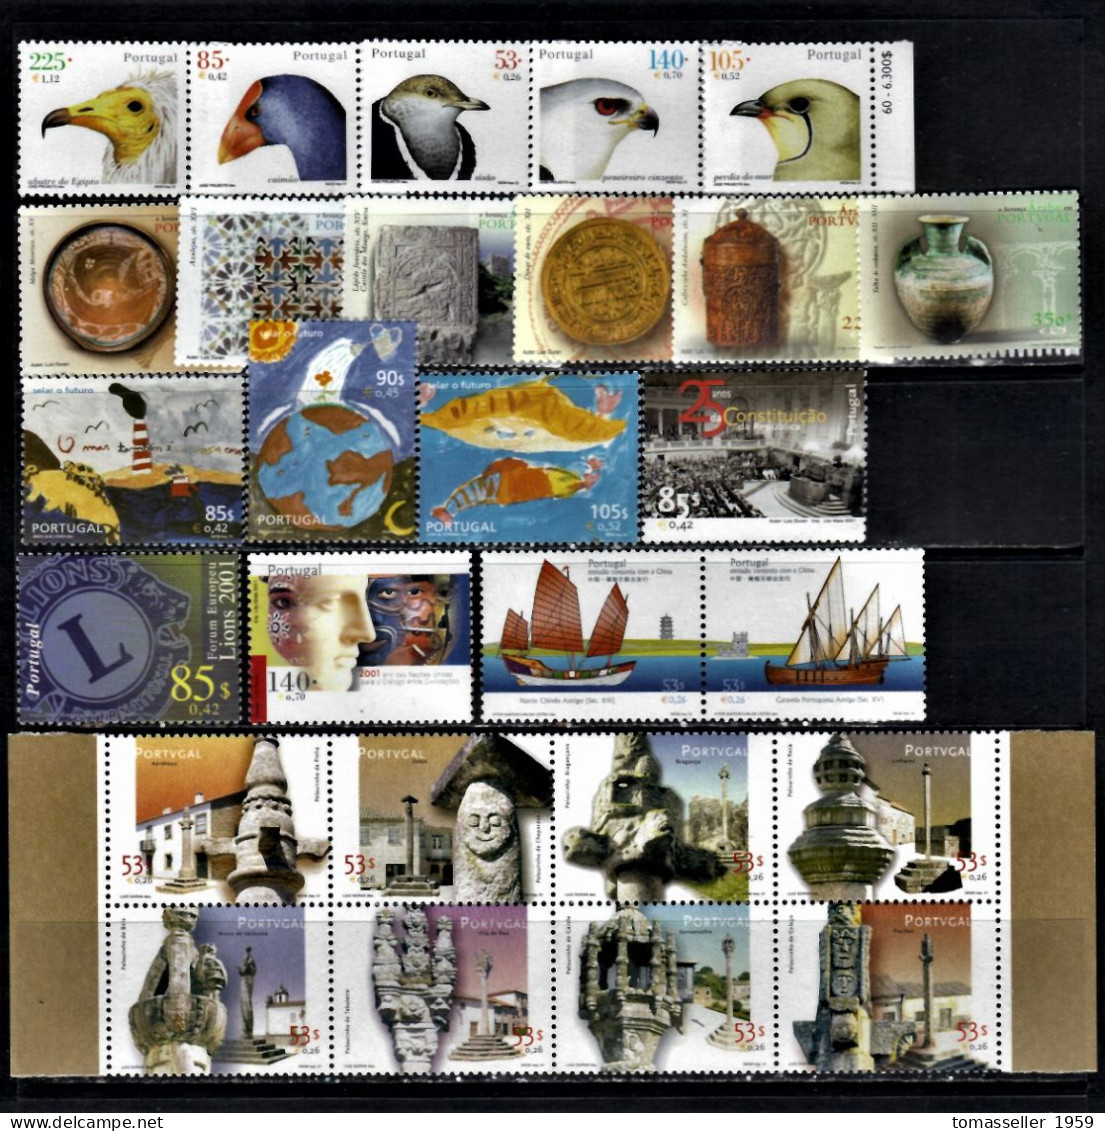 Portugal-2001- Year Set. 19 Issues-(stamps,s/s,booklets)-MNH** - Full Years